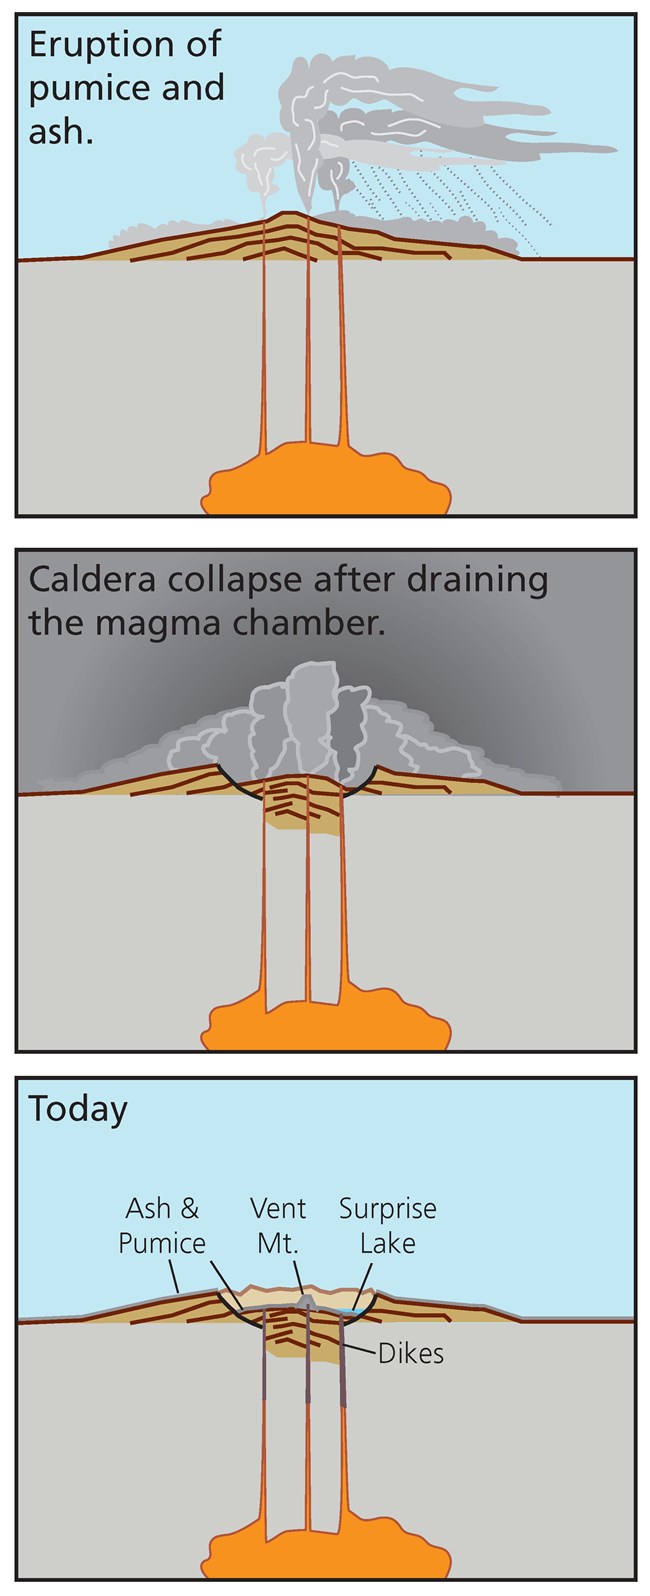 a series of 3 diagrams showing the sequence of eruption and caldera formation